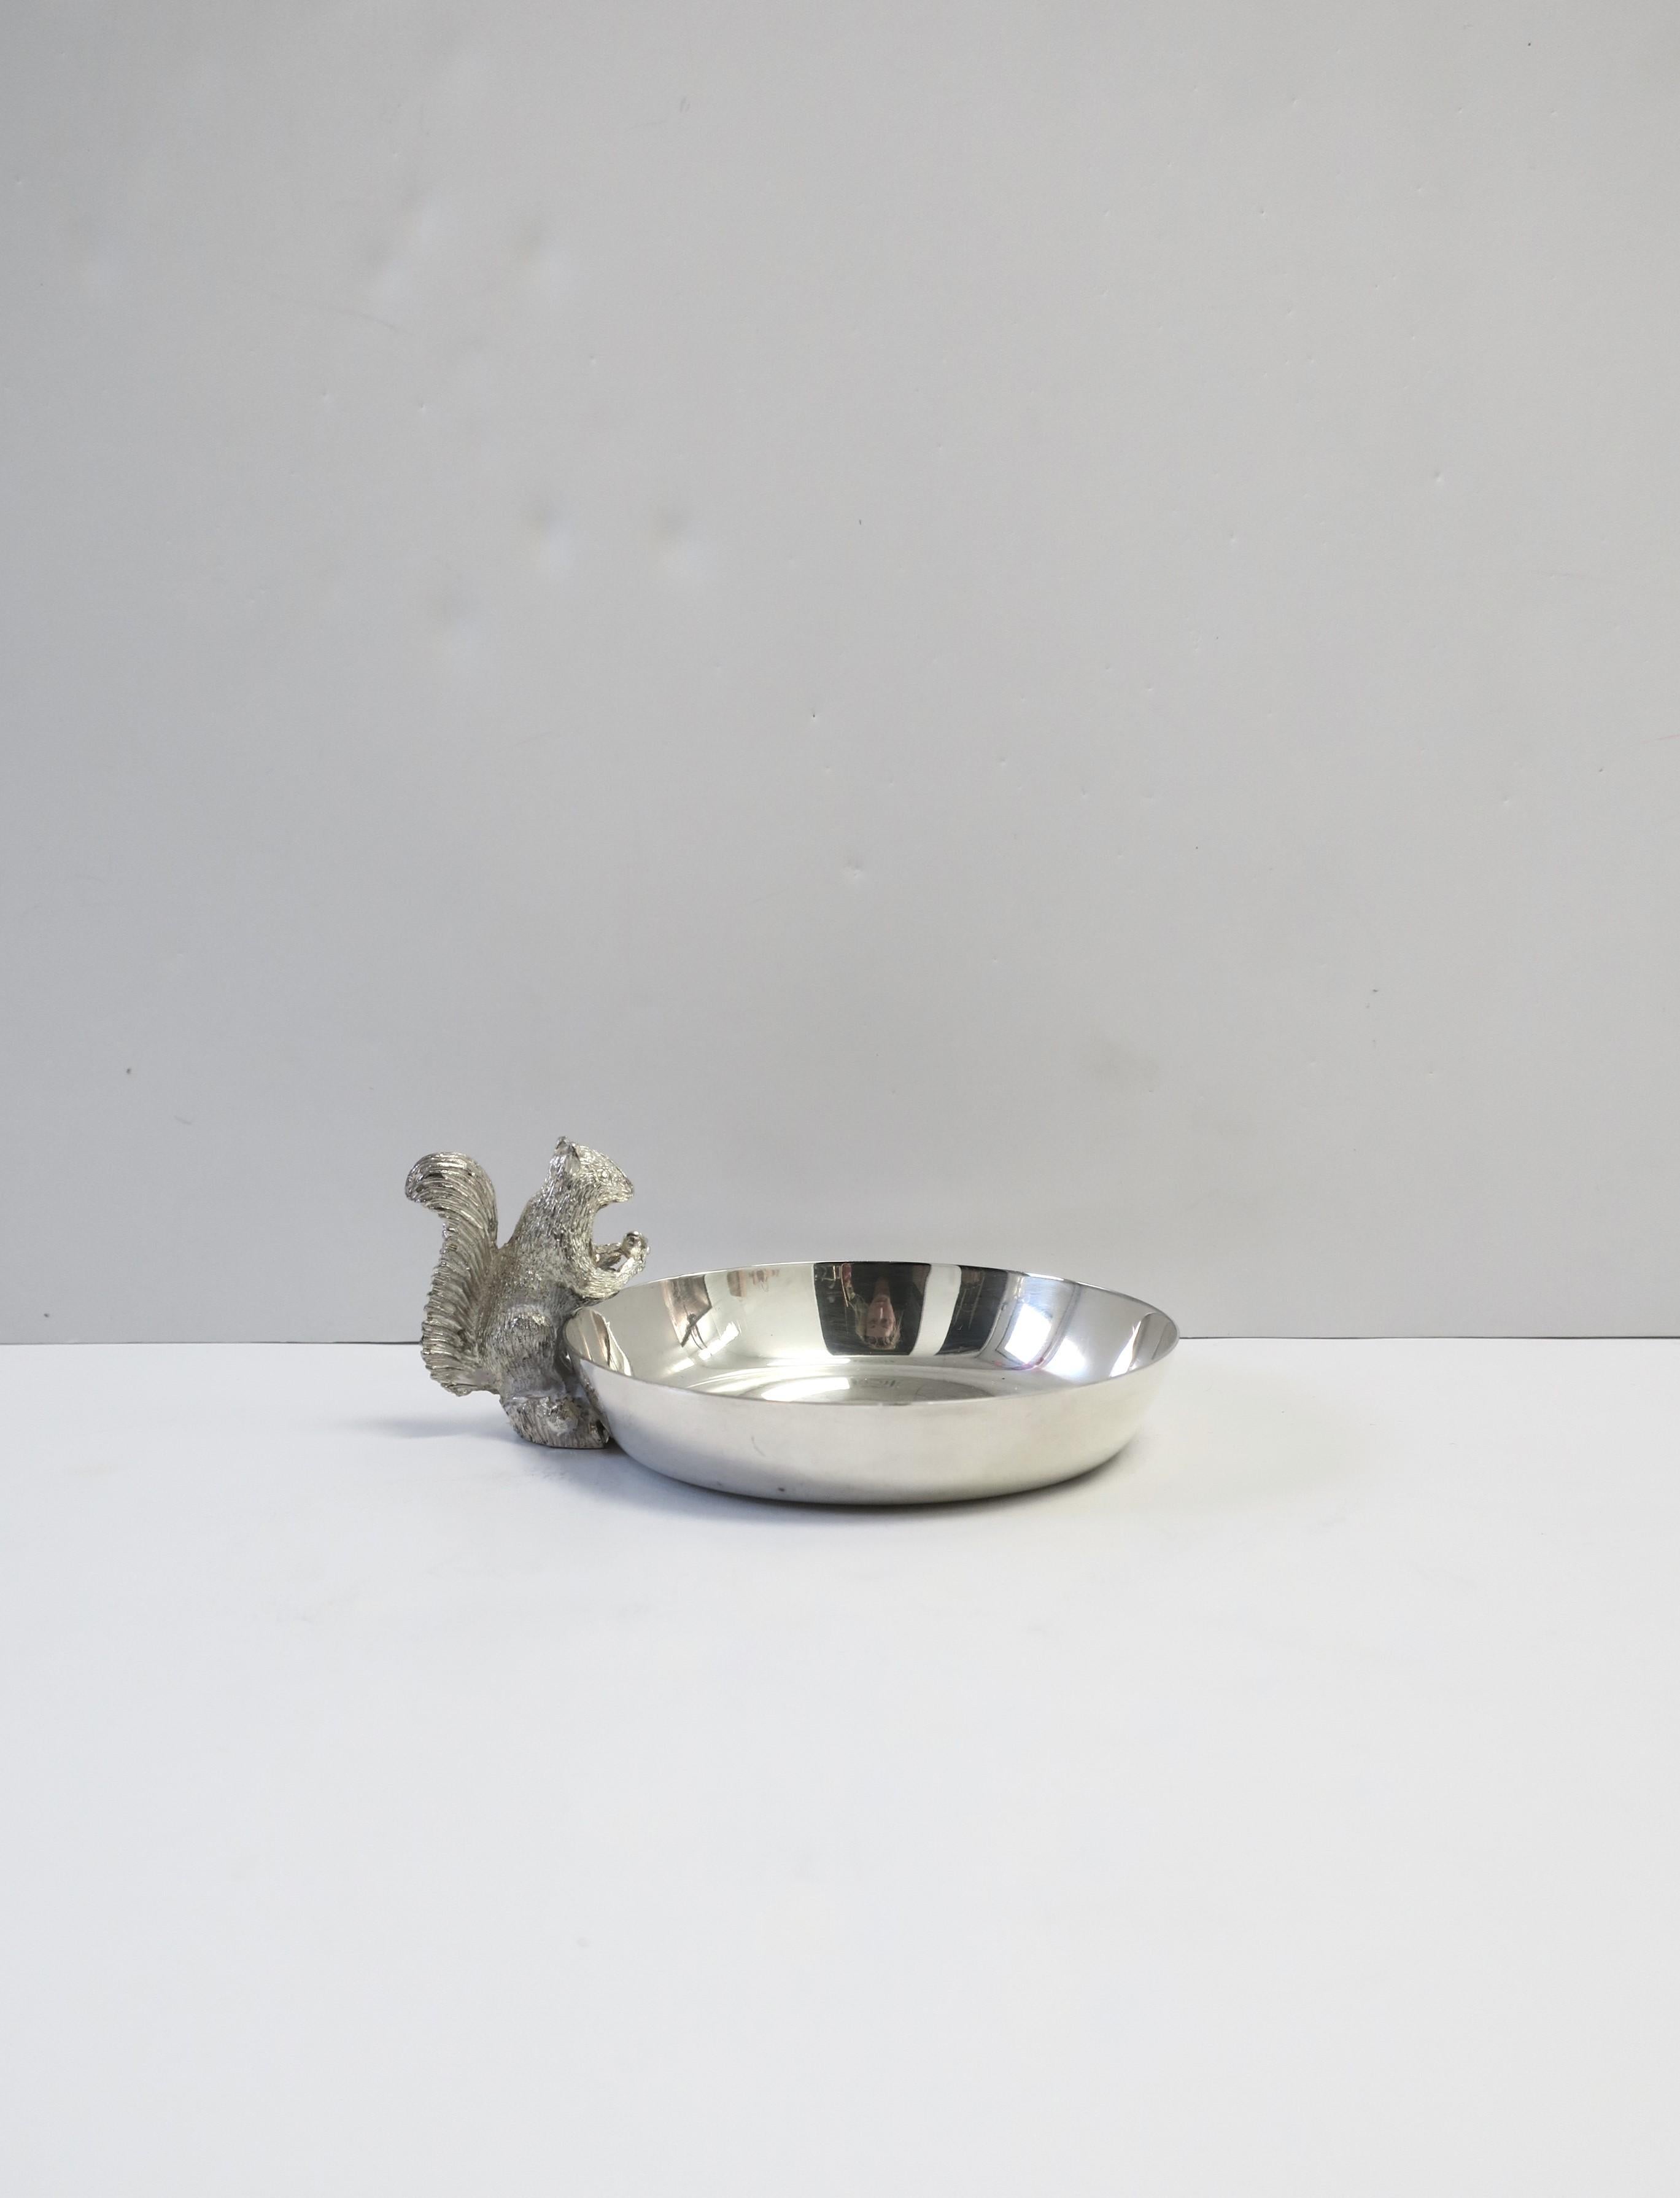 A small but substantial English sterling silver plate squirrel nut bowl, circa late-20th century, England. Piece is solid copper with sterling silver plate overlay and a detailed squirrel on the side of this small bowl. Piece is marked 'Made in